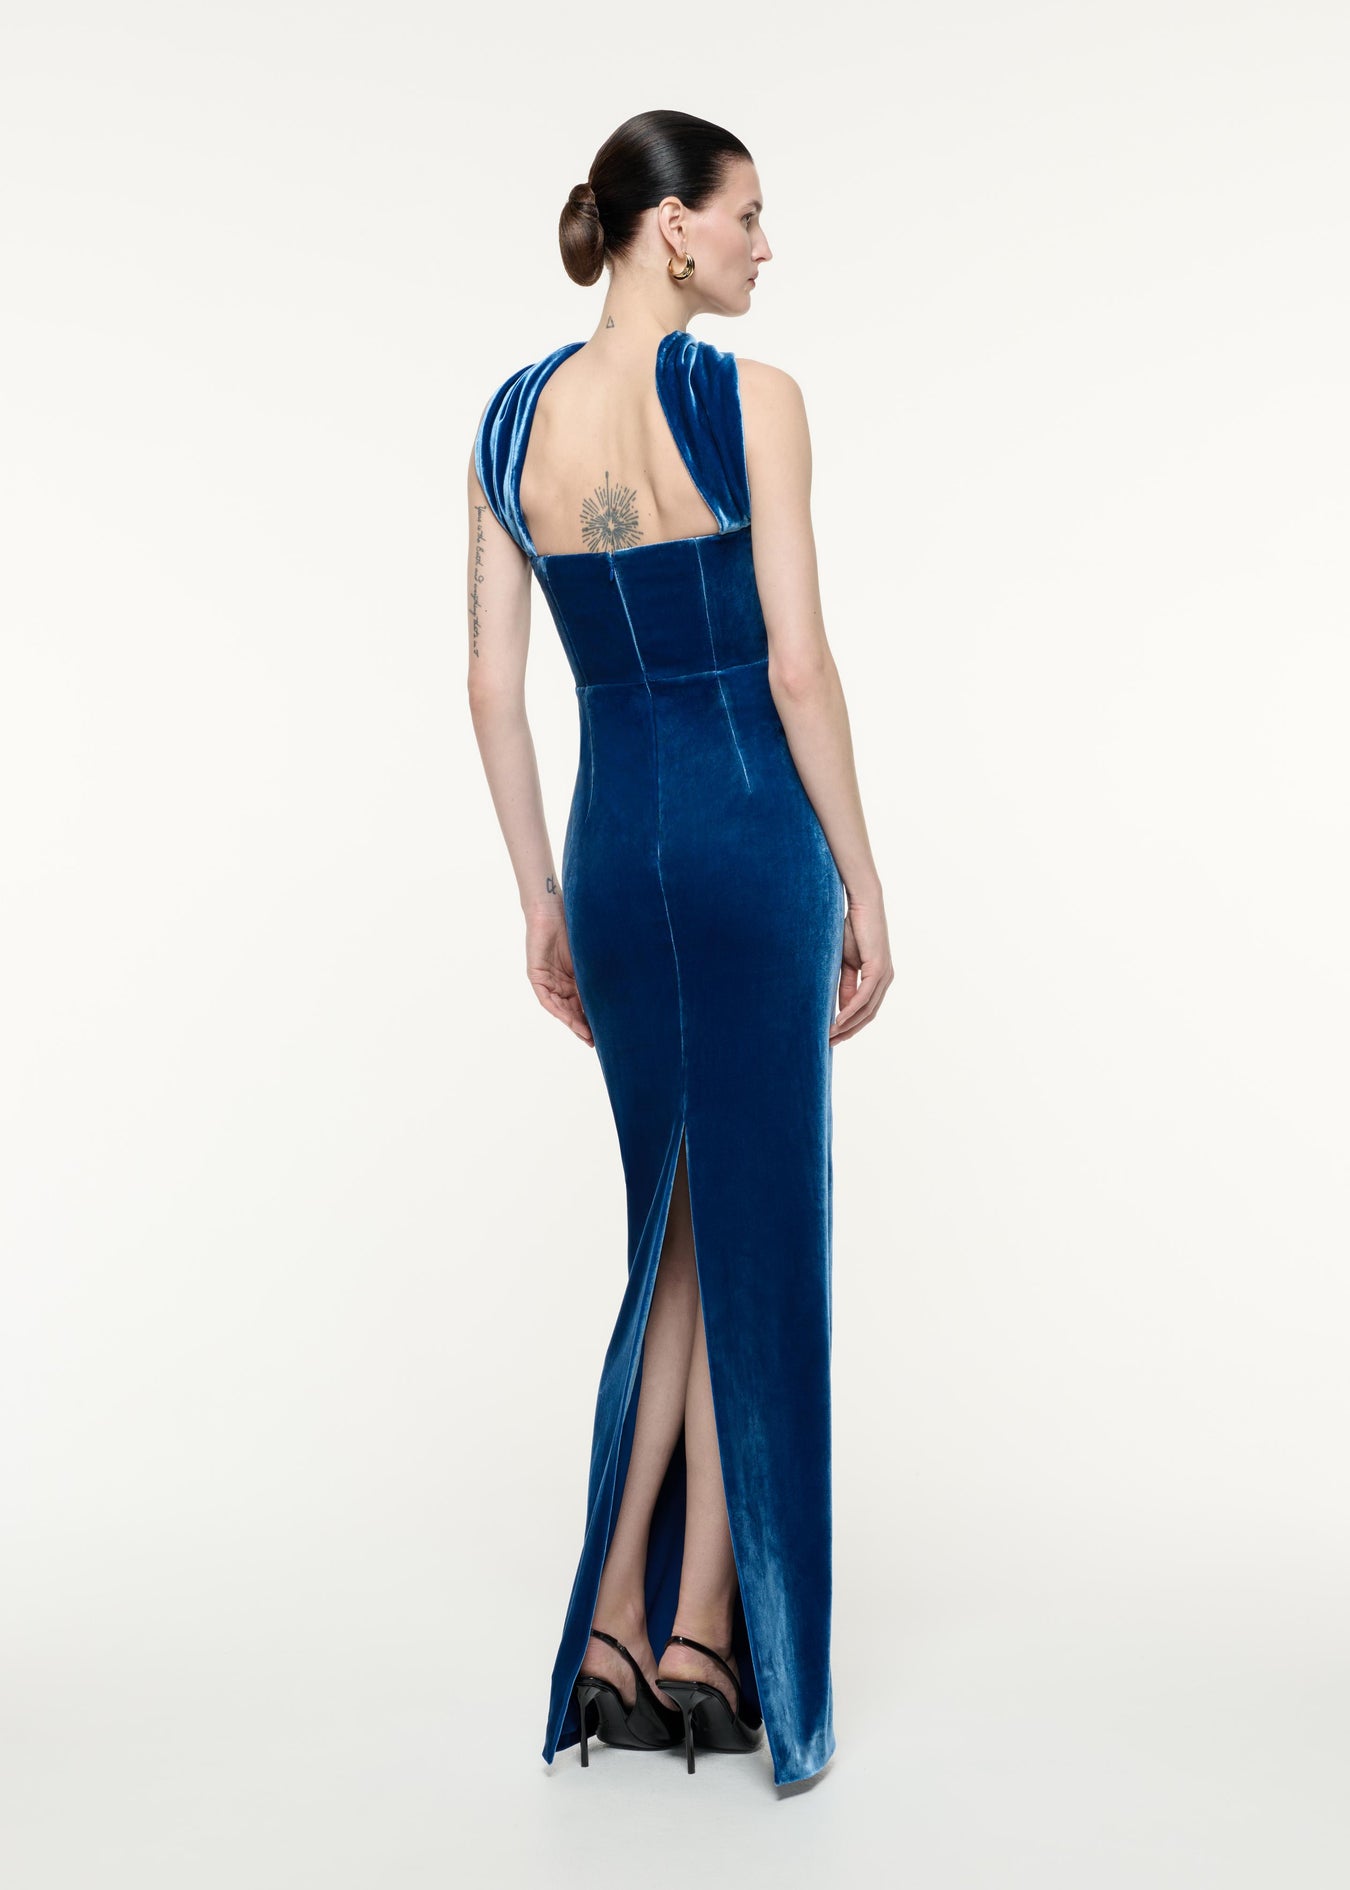 A back view image of a model wearing the Velvet Sash Gown in Navy